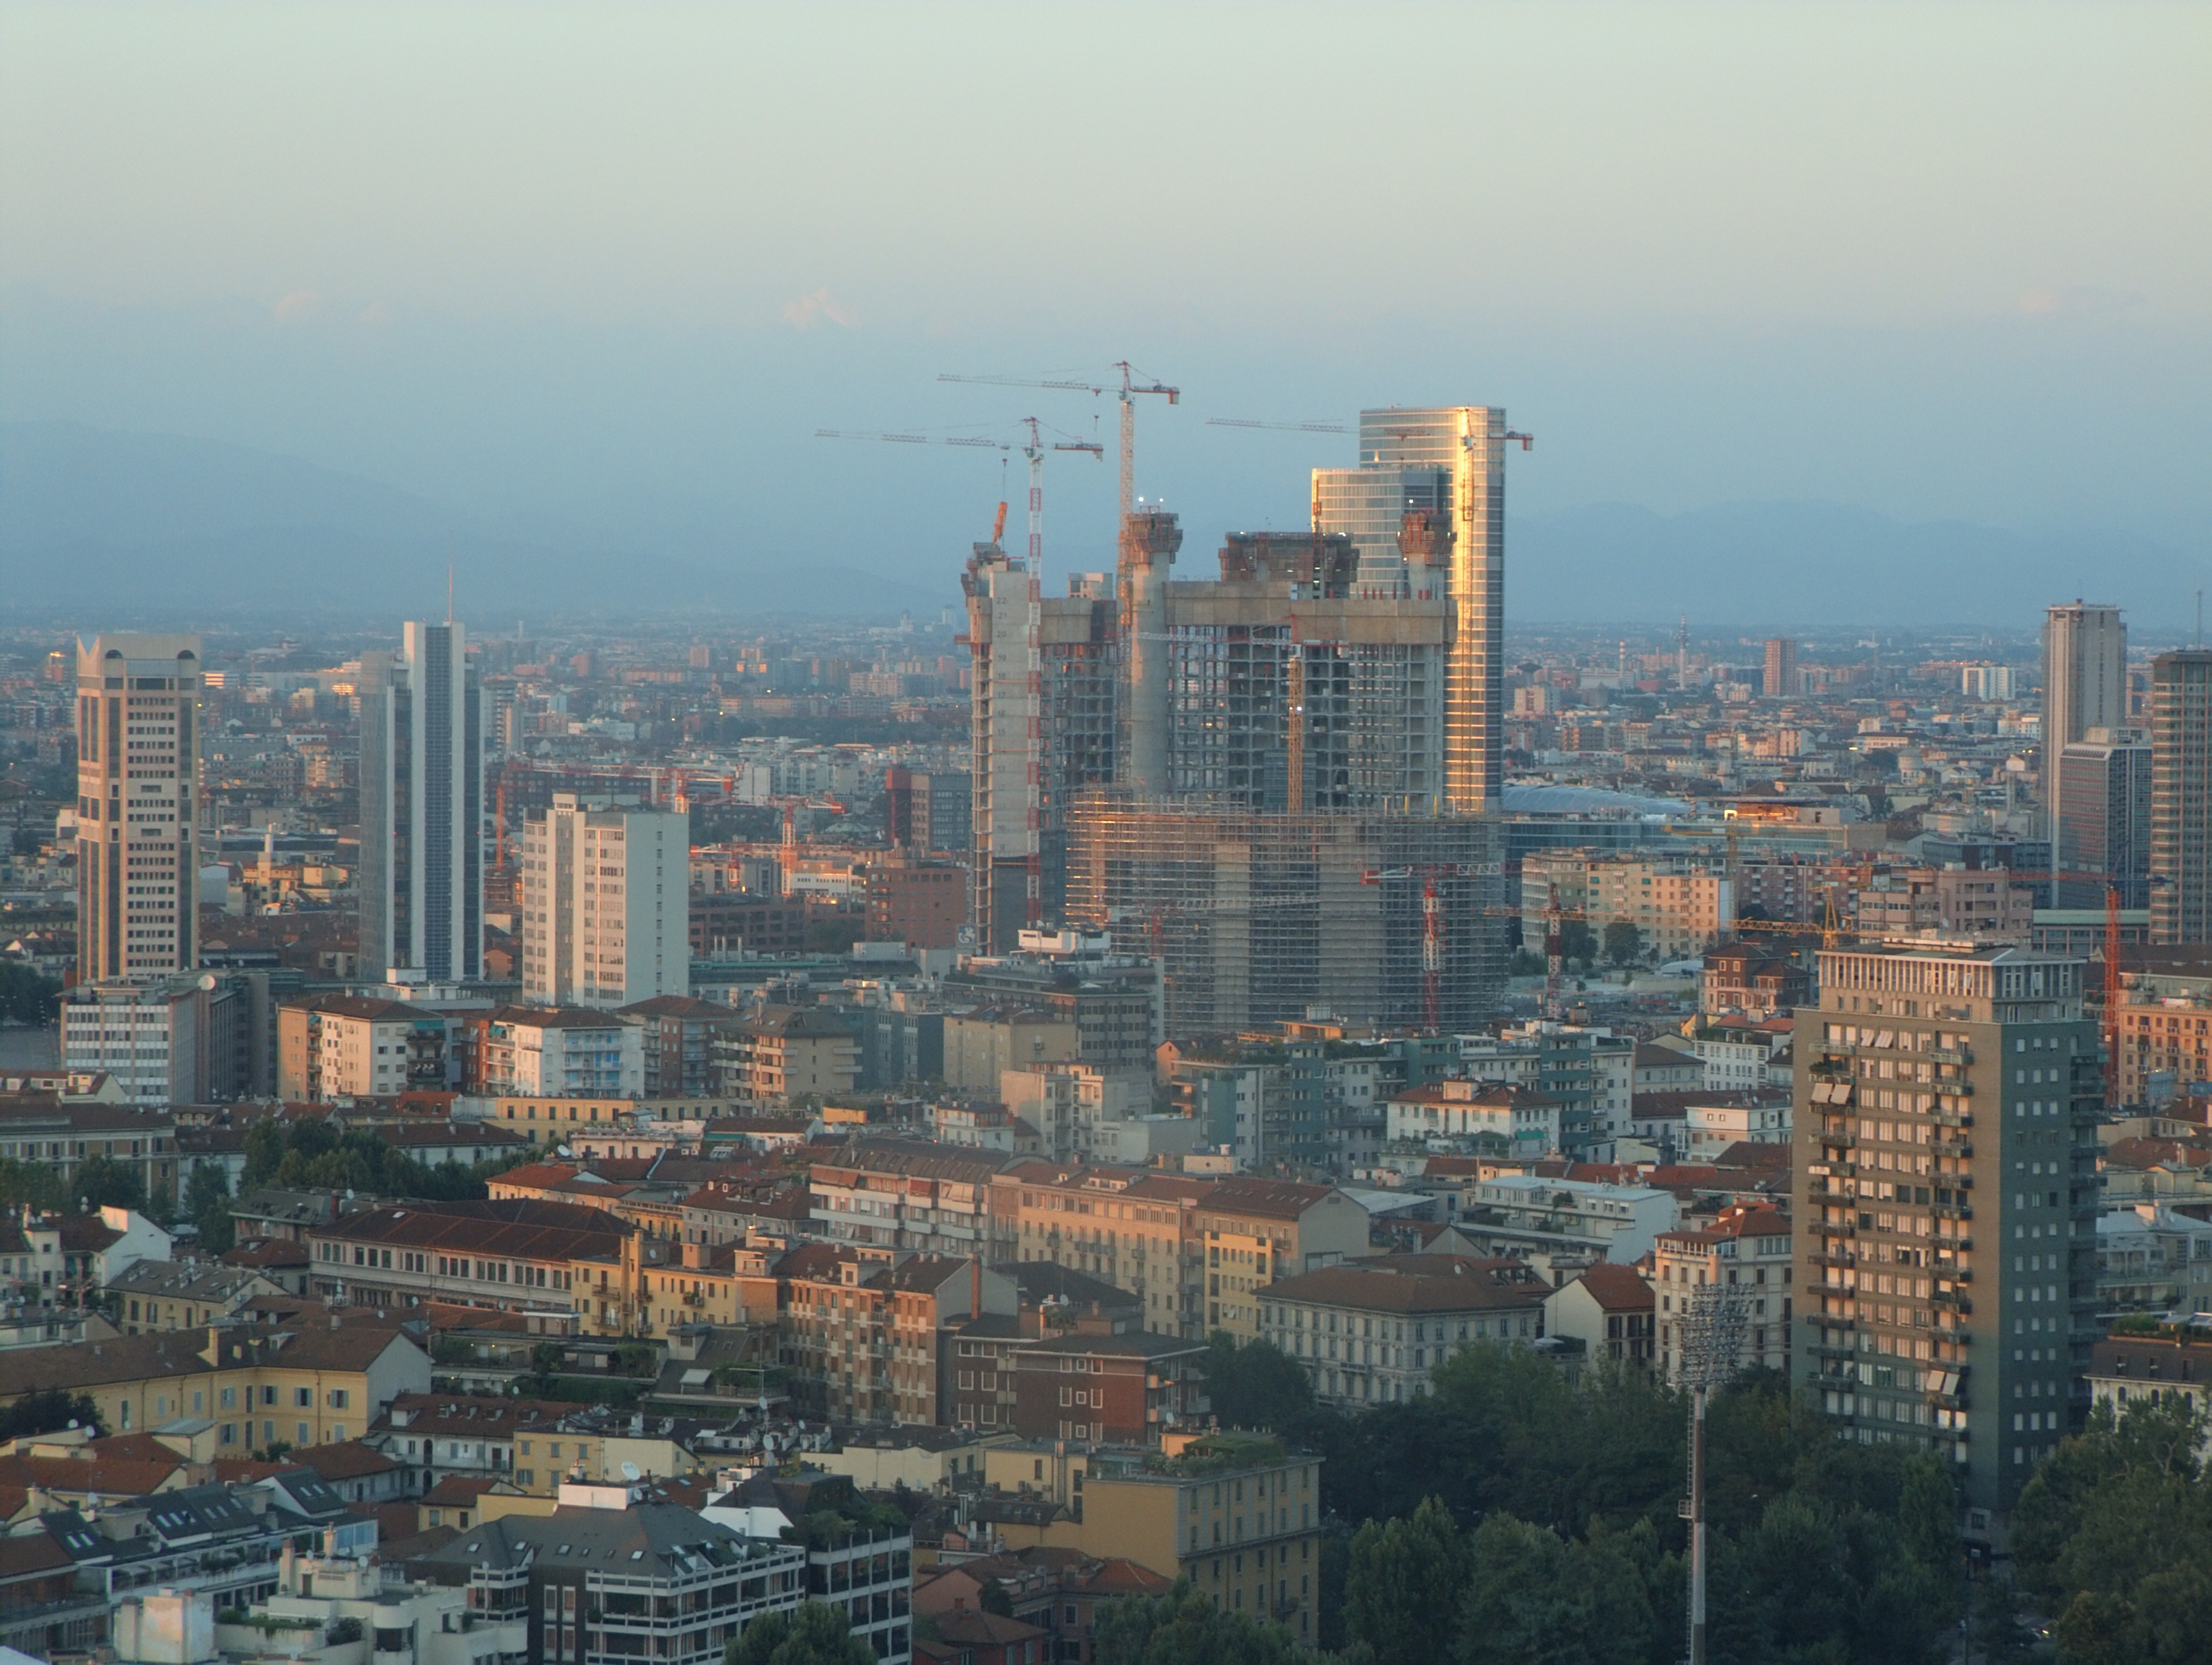 Milan (Italy): The skyscrapers in the Gioia/Garibaldi quarter of Milan, seen from the Branca Tower - Milan (Italy)